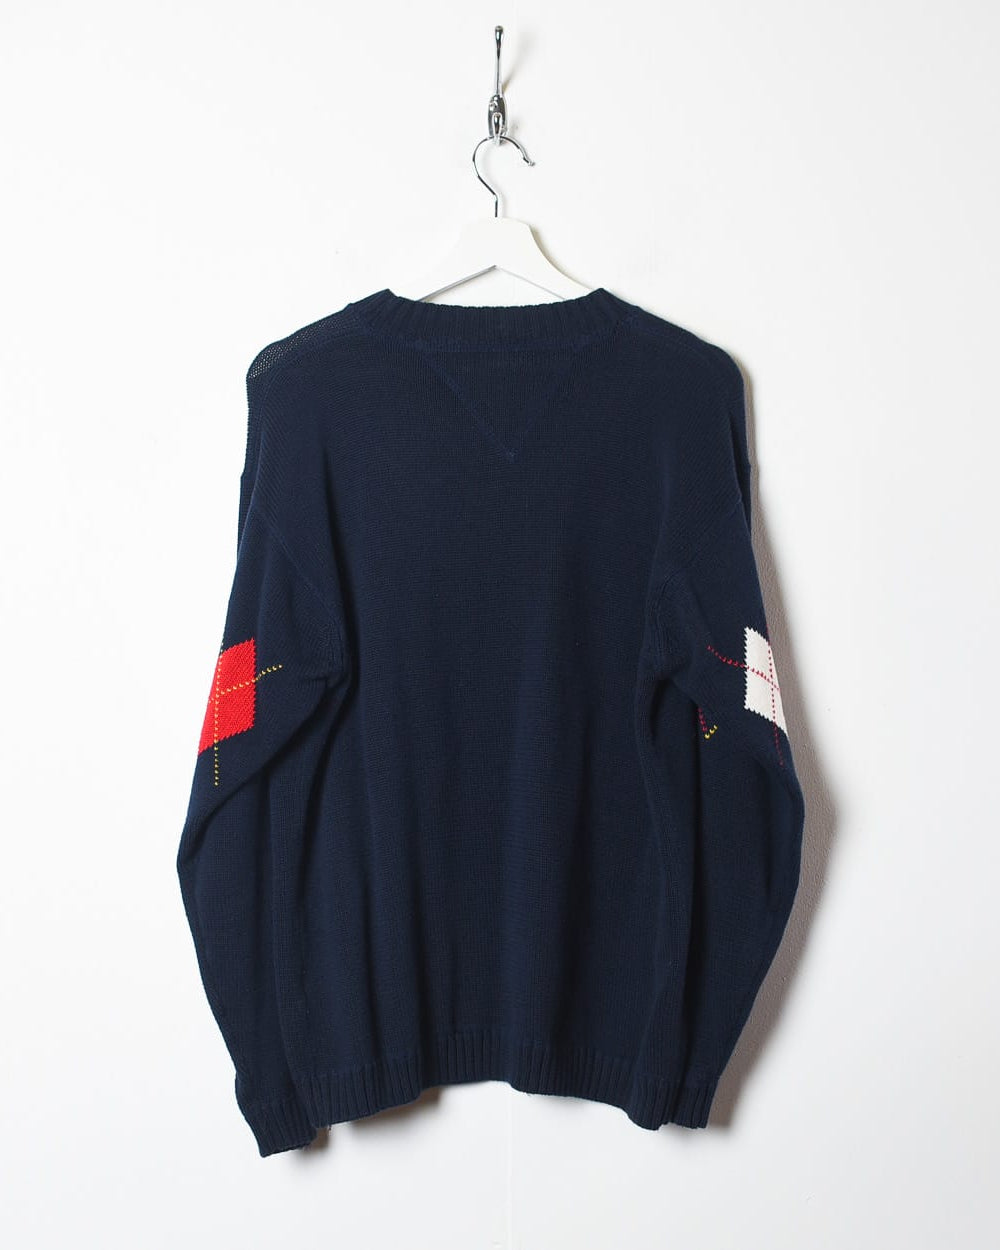 Navy Tommy Hilfiger Patterned Knitted Sweatshirt - Small